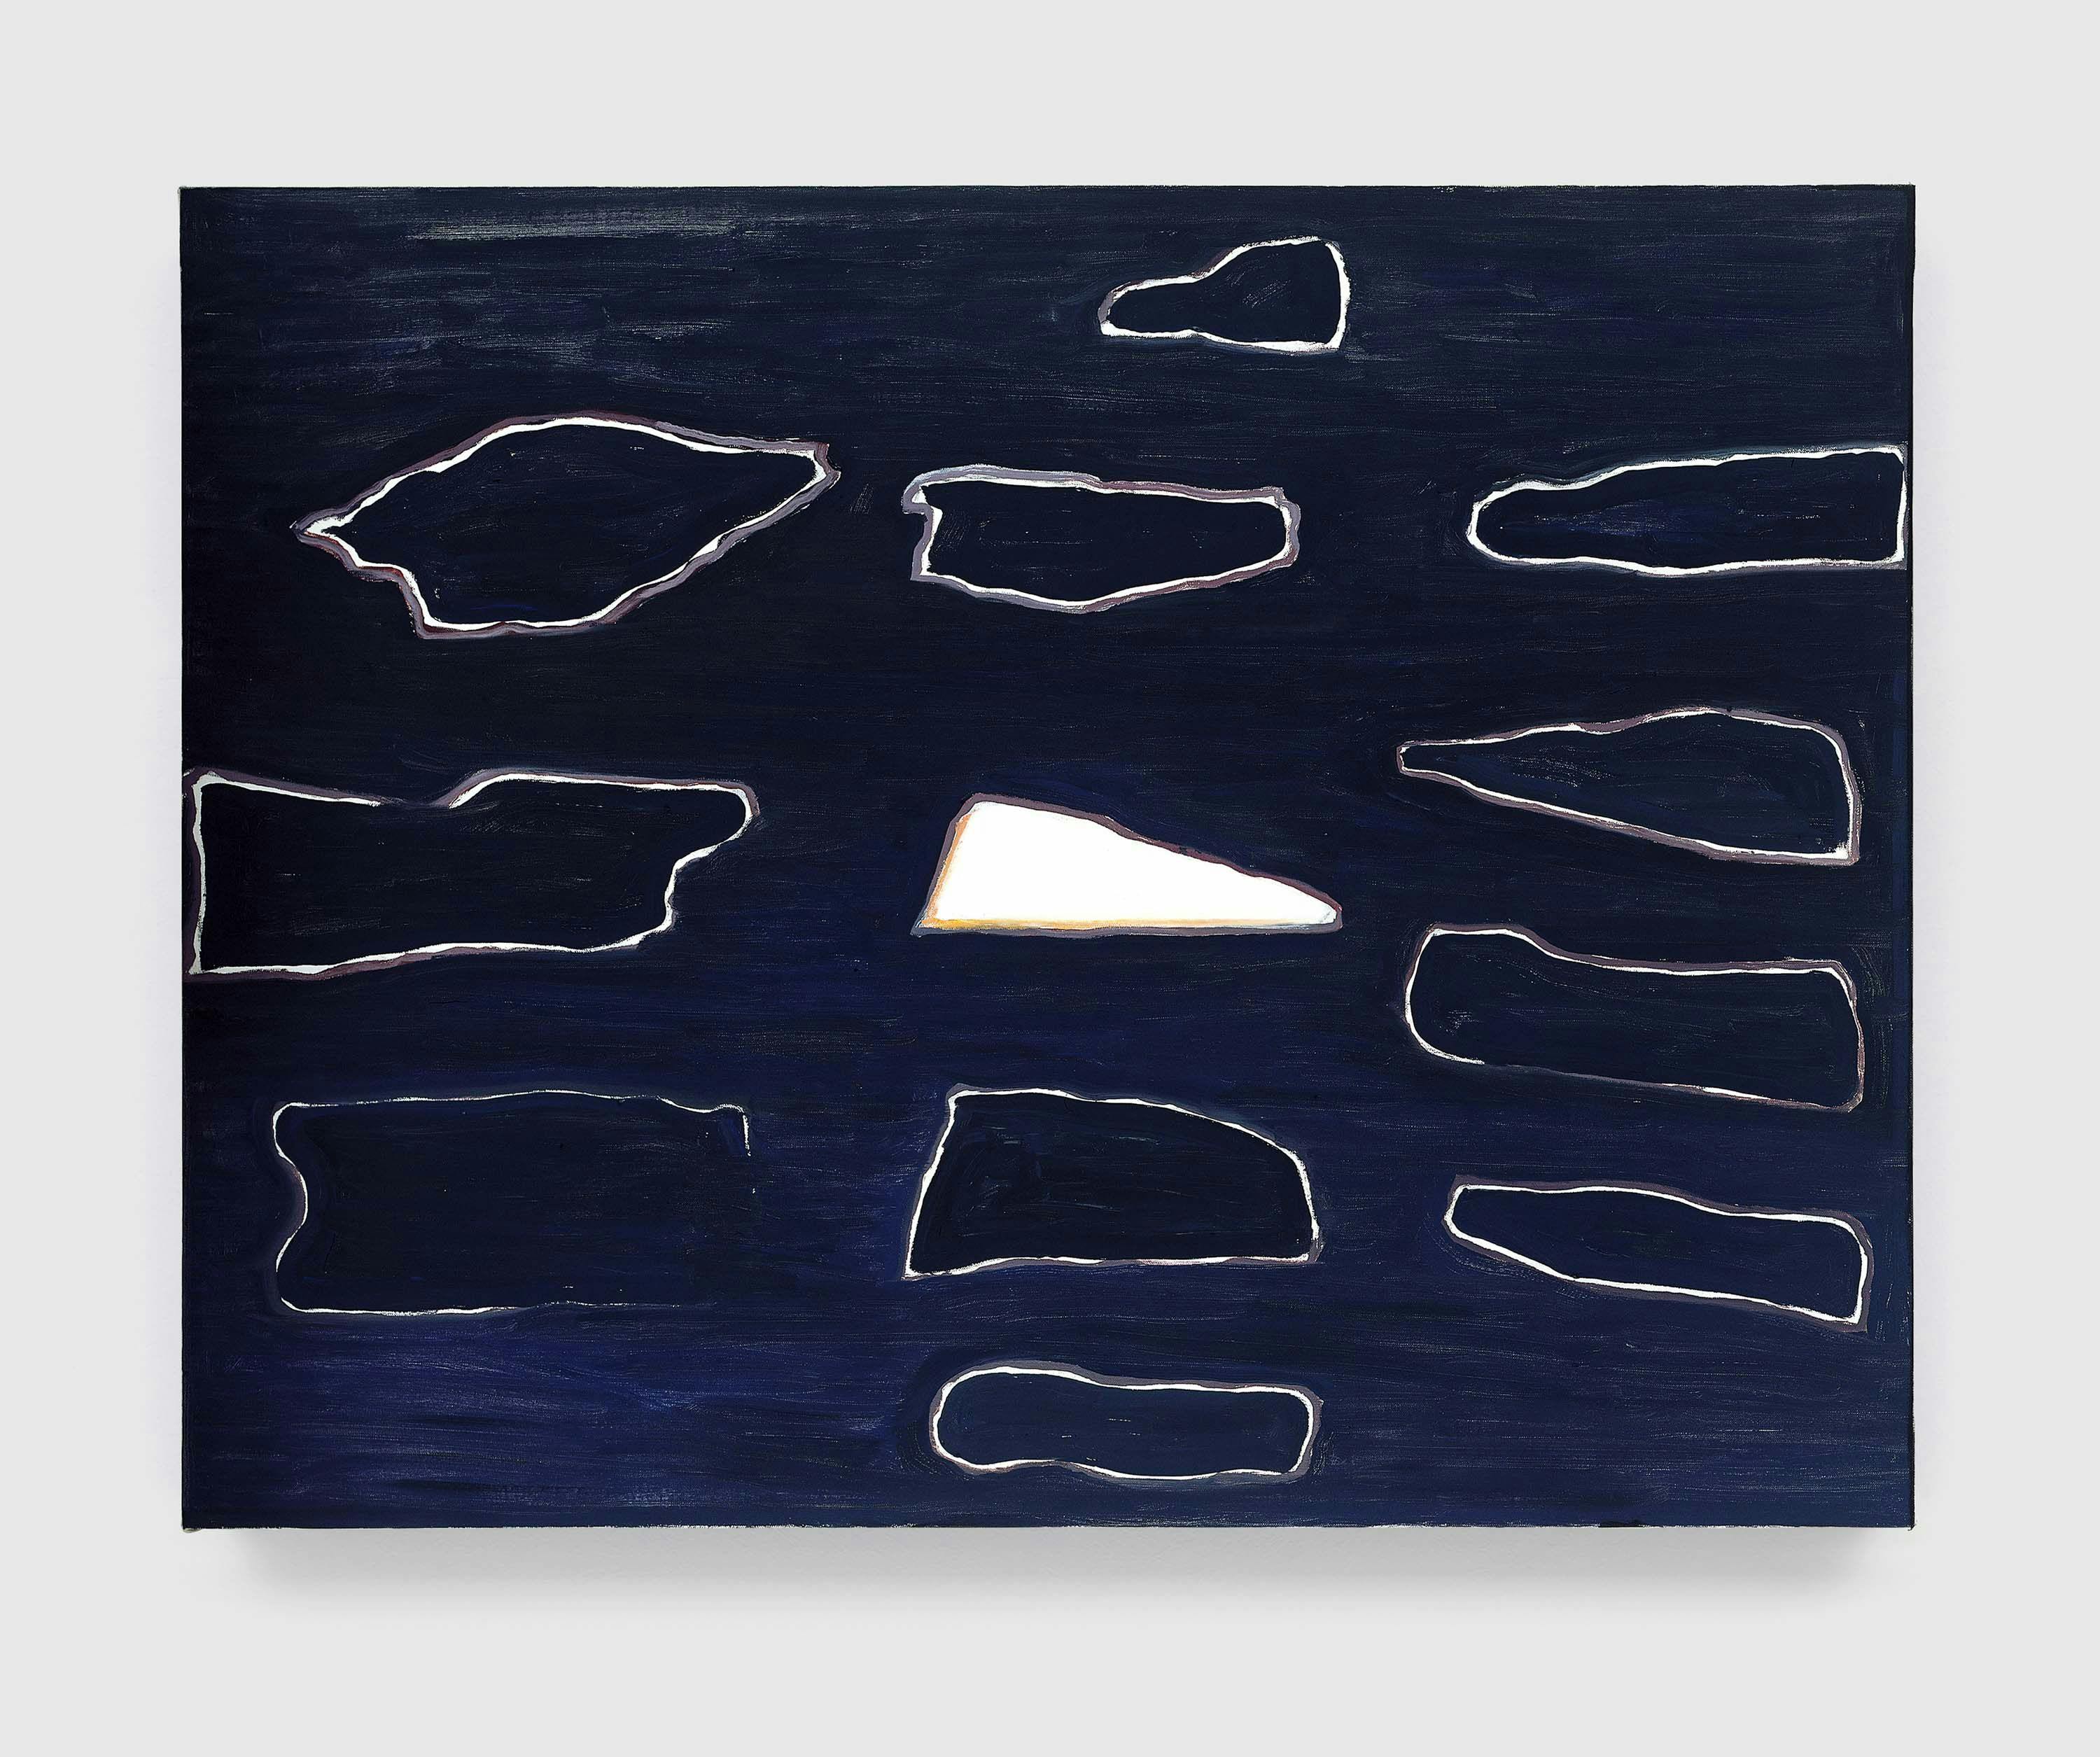 A painting by Raoul de Keyser, titled Come on, play it again nr. 1, dated 2001.